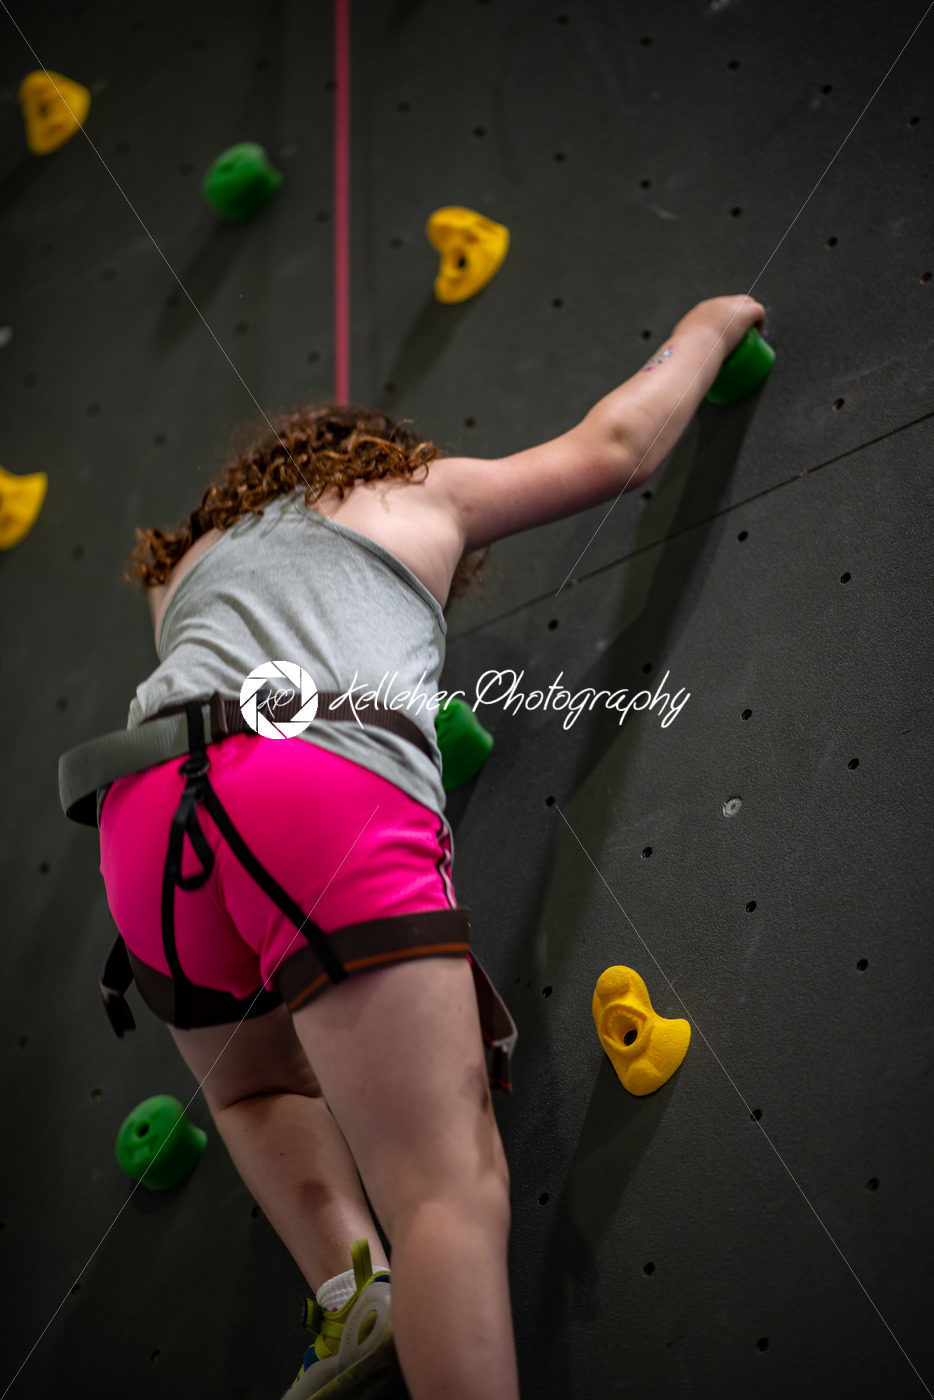 Young girl climbing up on practice wall in indoor rock gym - Kelleher Photography Store